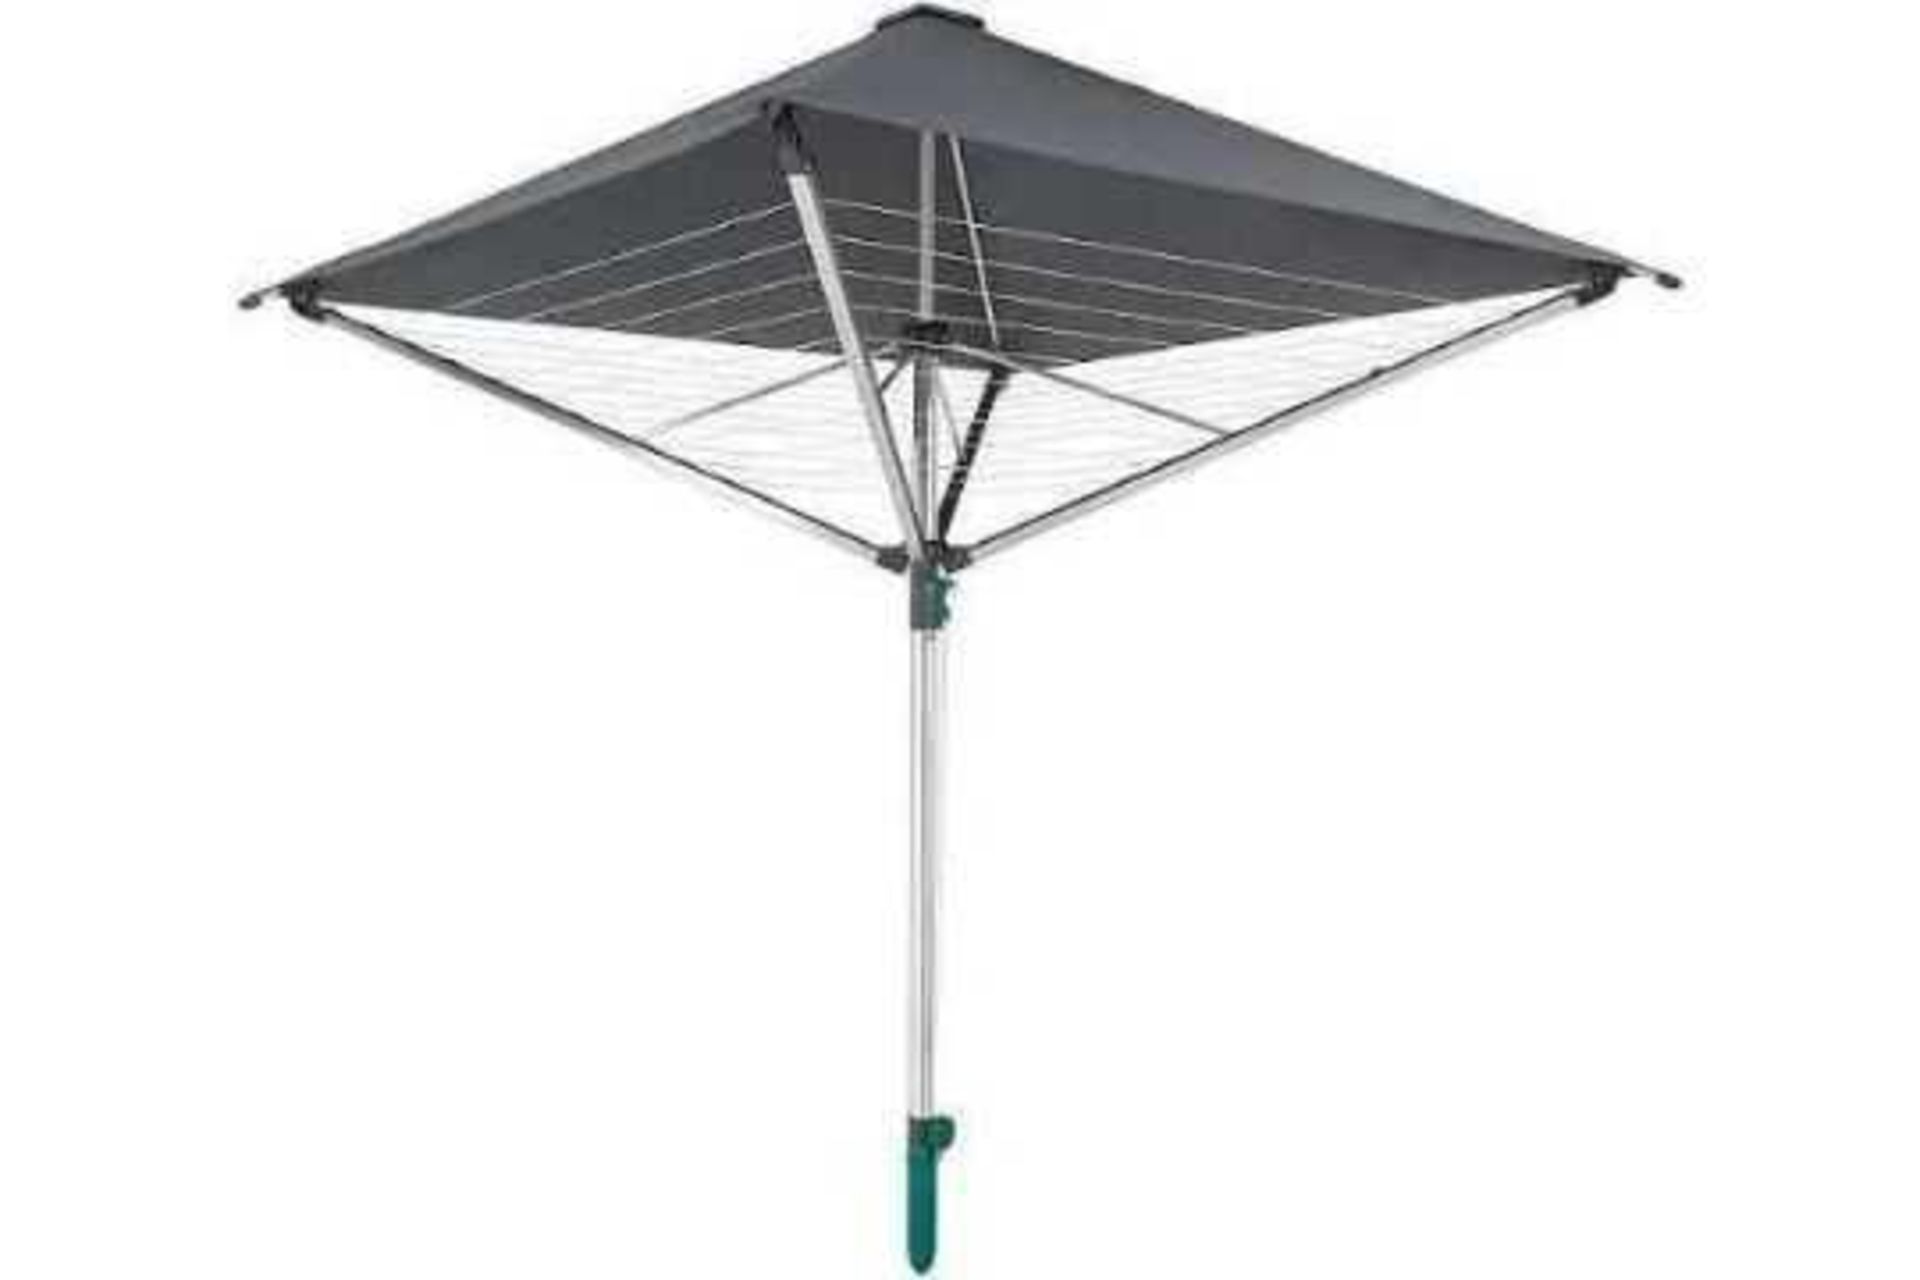 RRP £240 Lot To Contain 1 X Bagged Leifheit Linoprotect 400 Deluxe Rotary Washing Line Airer Dryer